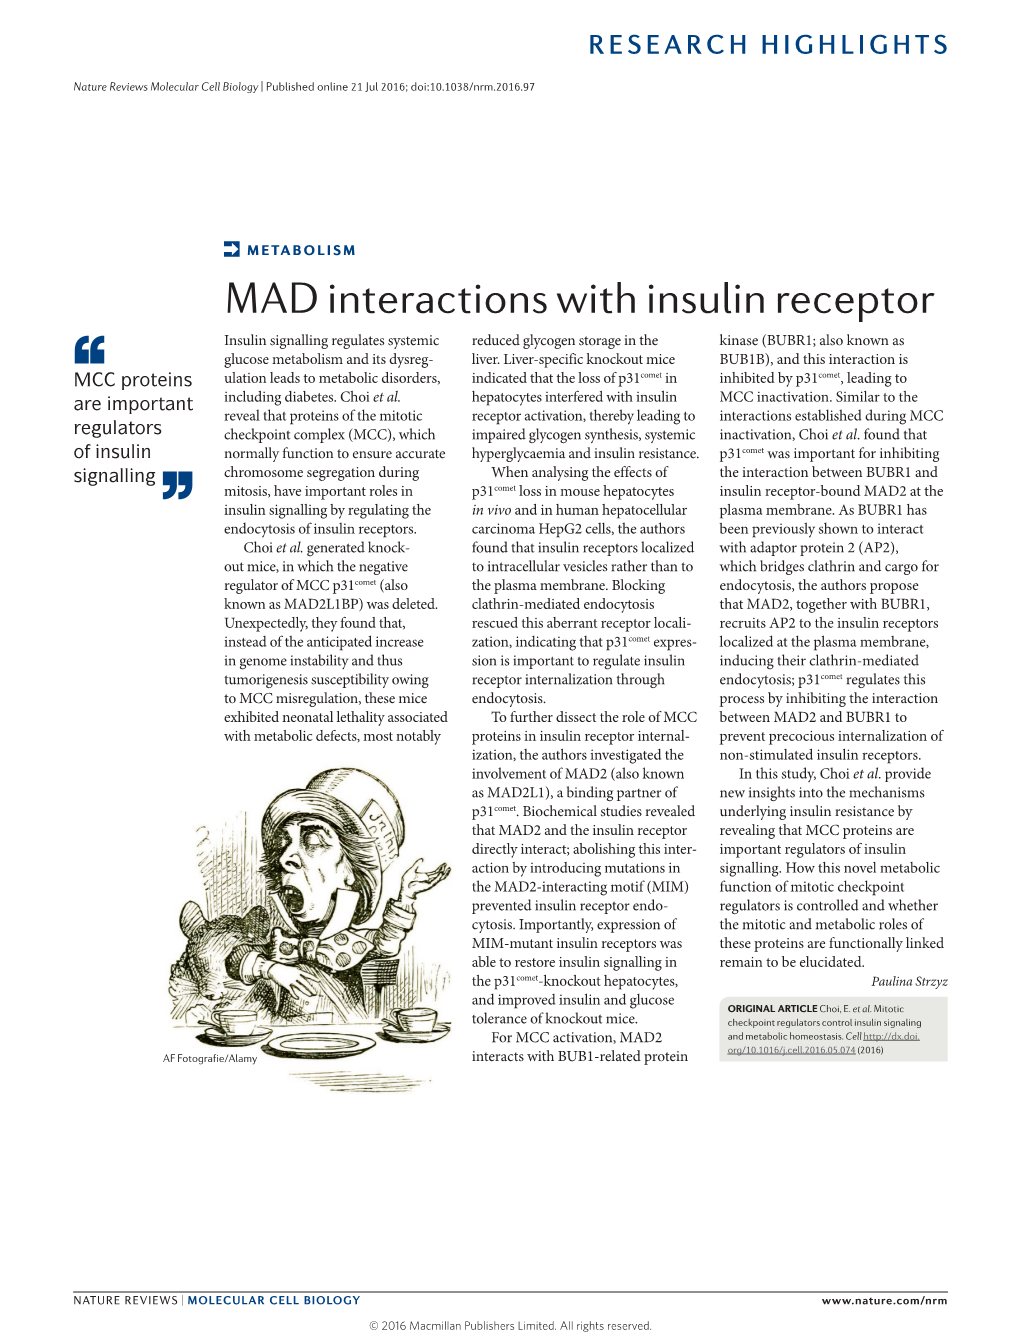 Metabolism: MAD Interactions with Insulin Receptor